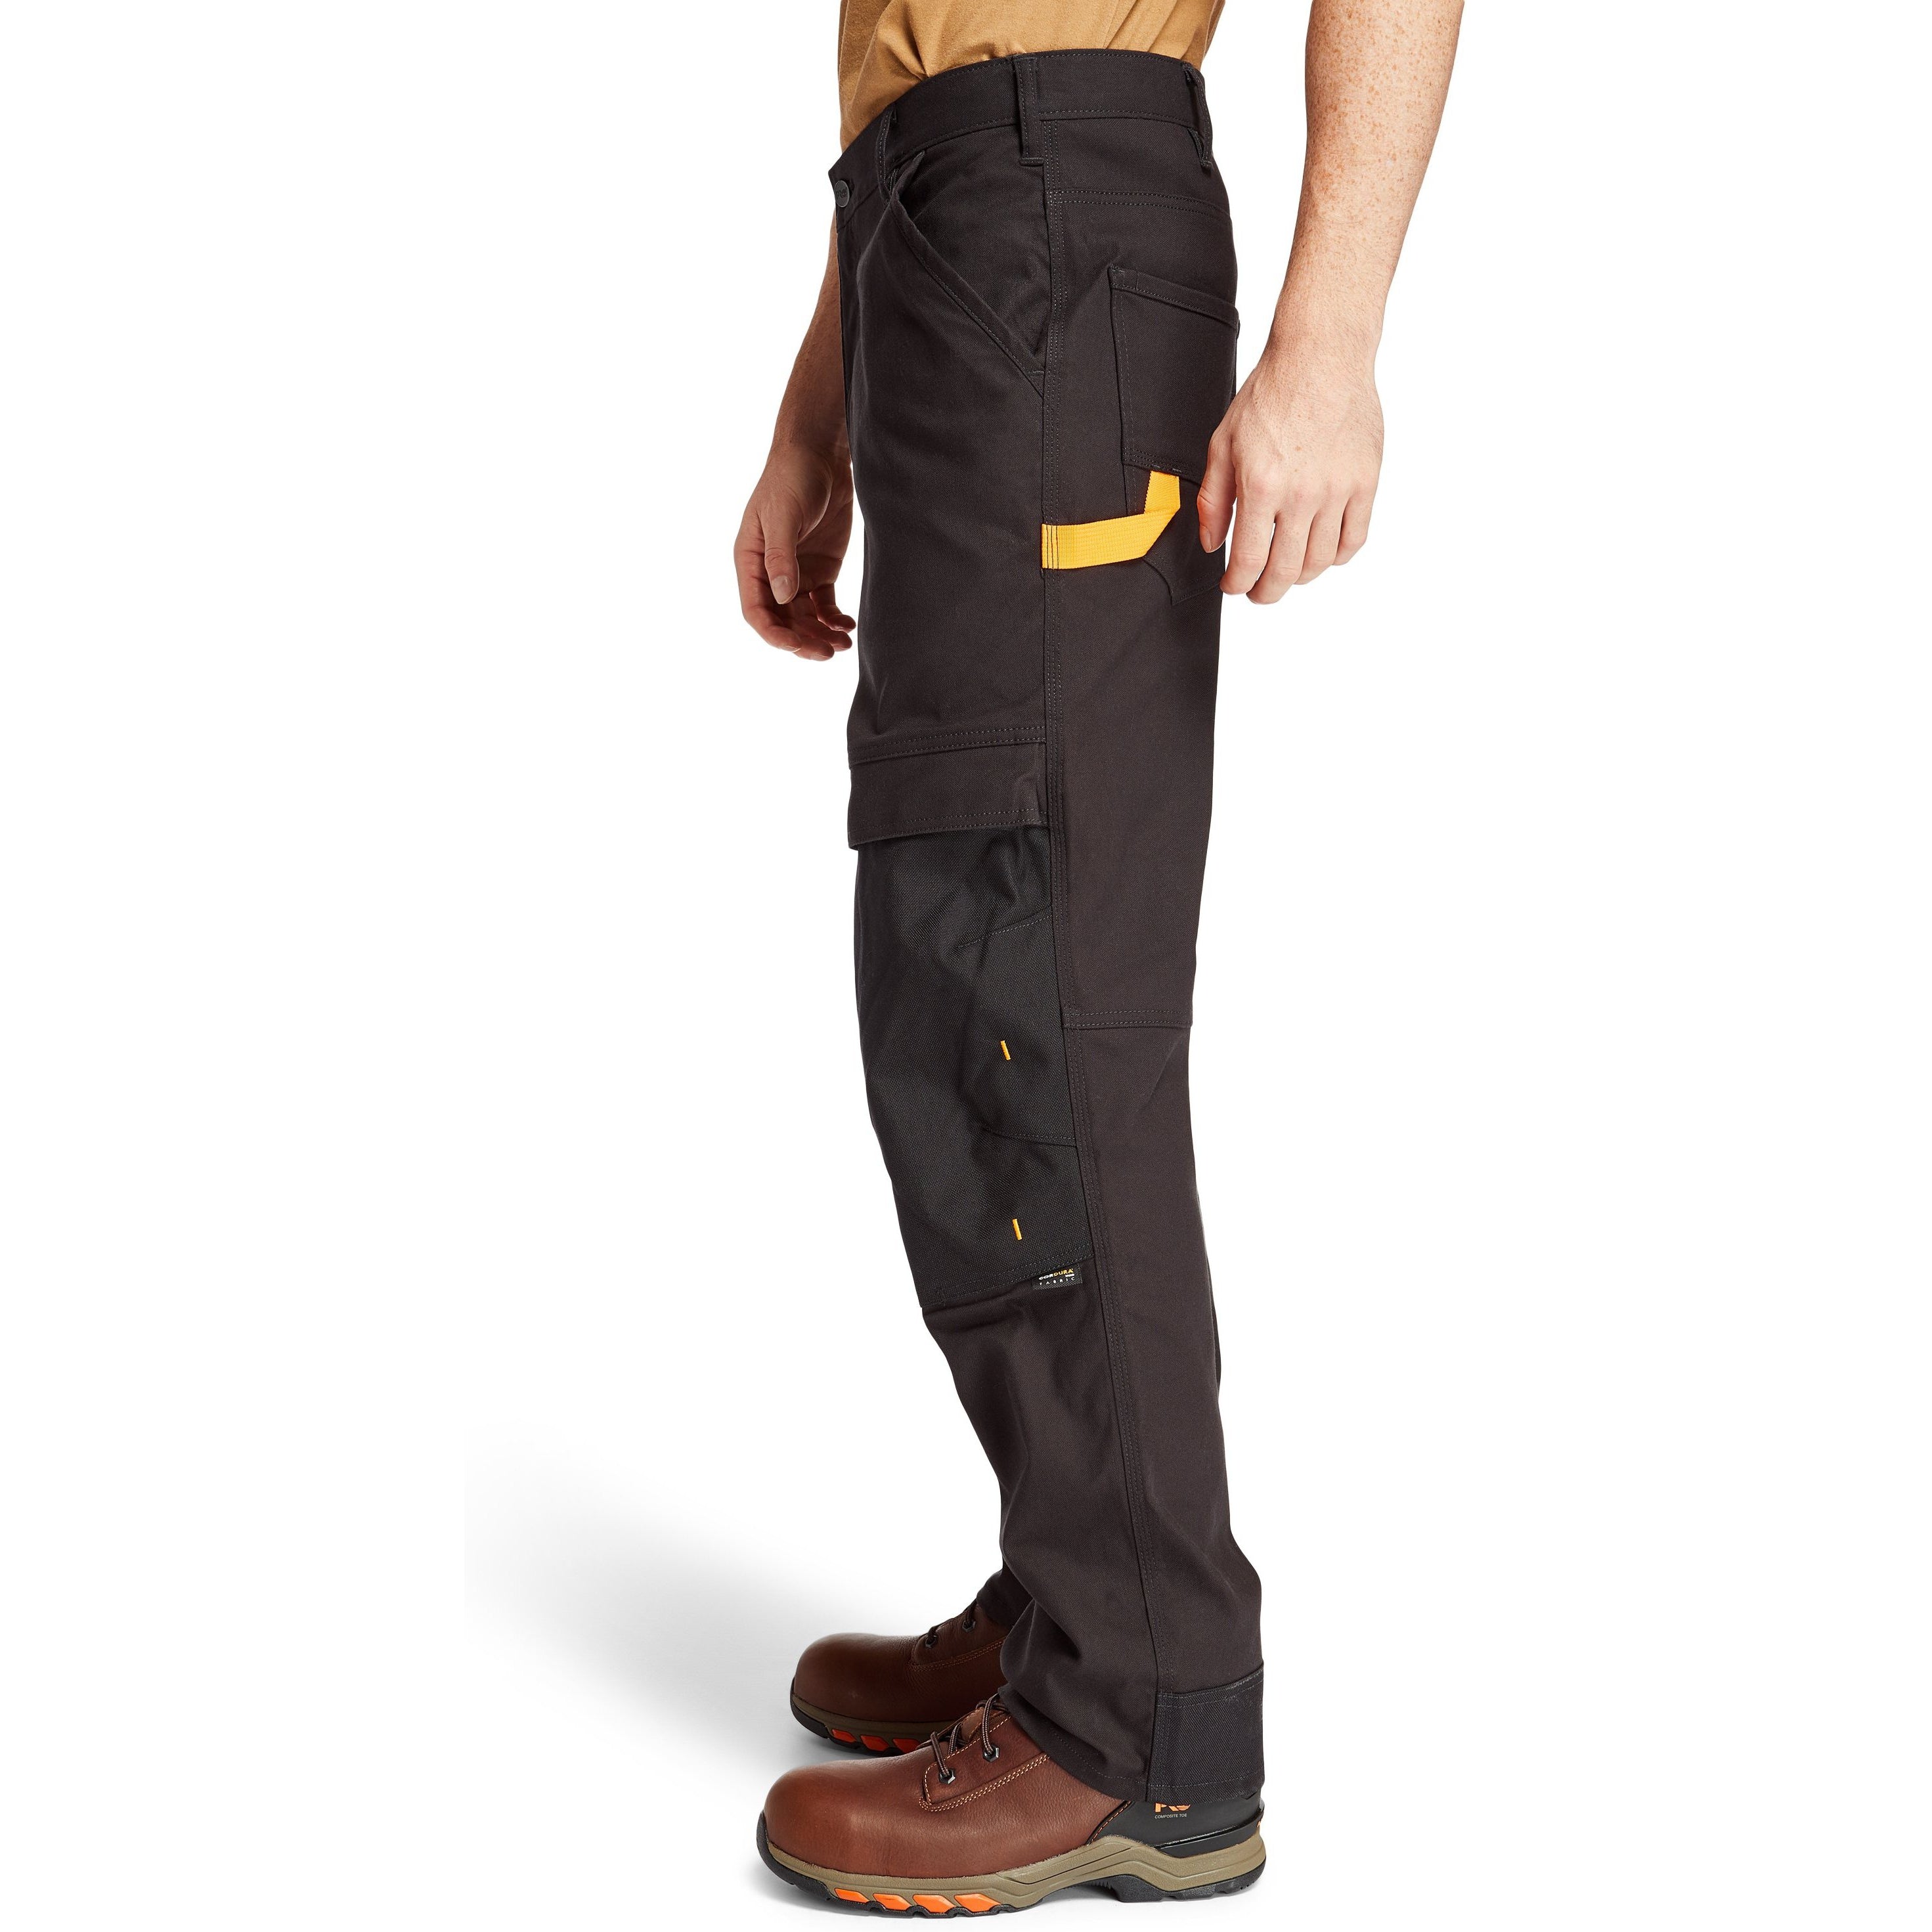 Timberland Pro Men's Gridflex Knee Pad Work Pant - Black- TB0A1OVC015  - Overlook Boots